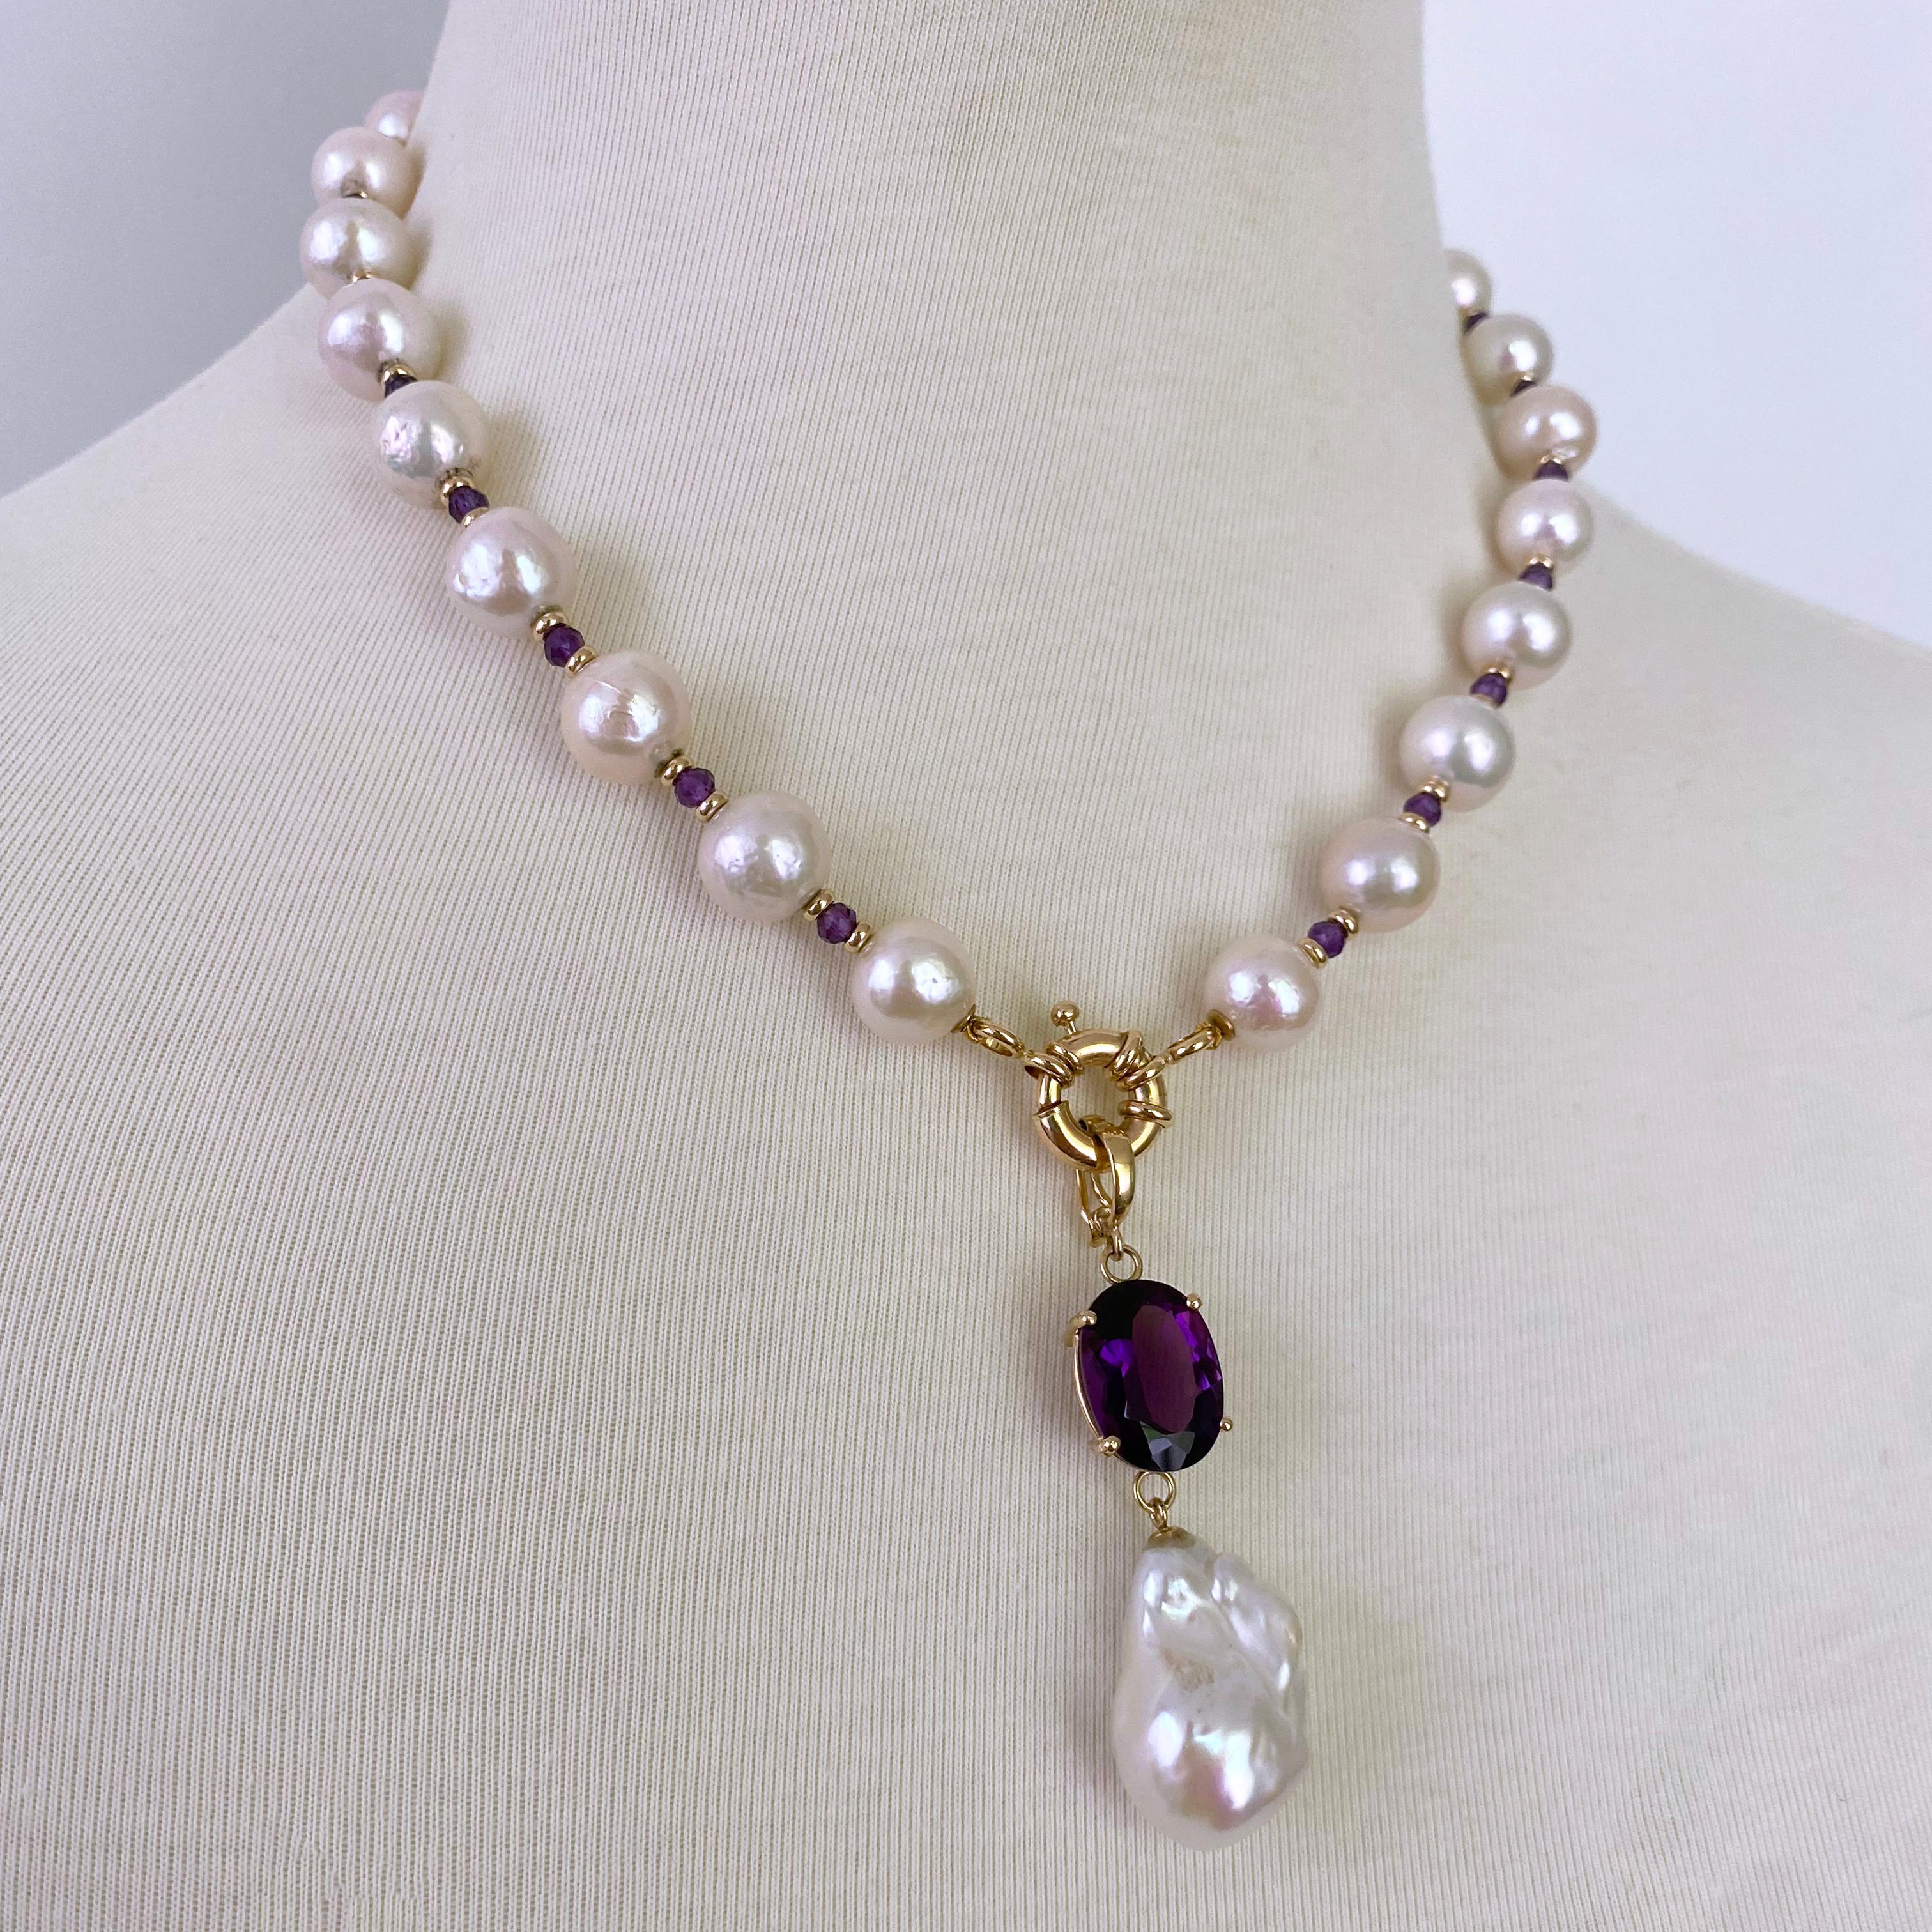 Gorgeous Amethyst and Pearl Necklace from Marina J.

This piece is made with all Baroque Pearls, Faceted Amethyst & solid 14k Yellow Findings. The Baroque Pearls in this necklace display a magnificent iridescent luster giving a multi color sheen.